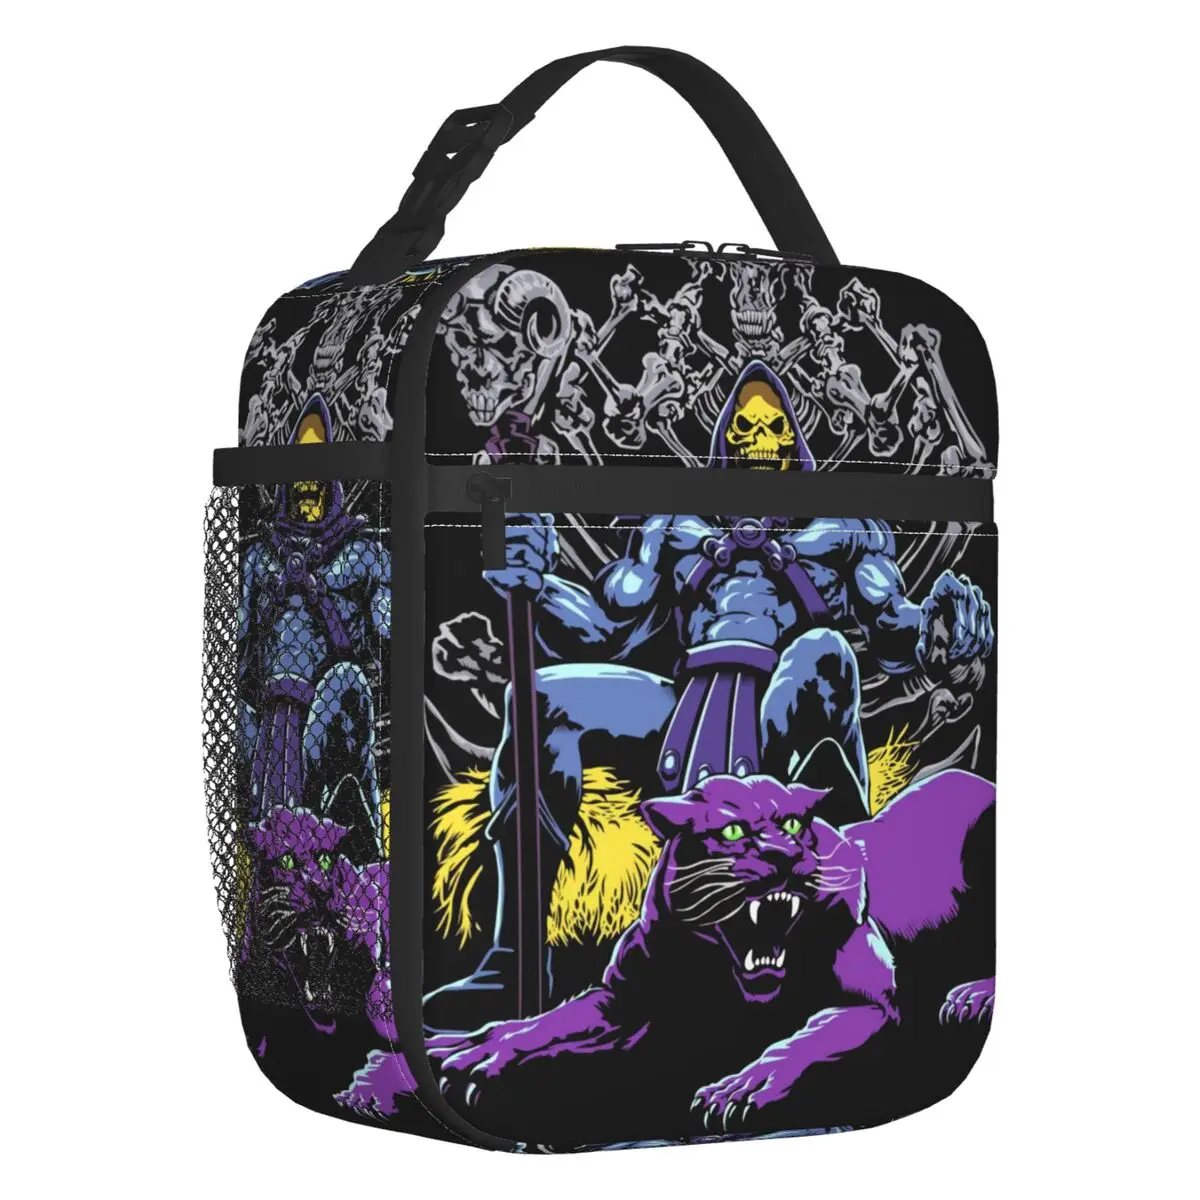 He Man Skeletor Thermal Insulated Lunch Bag Masters Of The Universe Resuable Lunch Tote for Work School Travel Storage Food Box